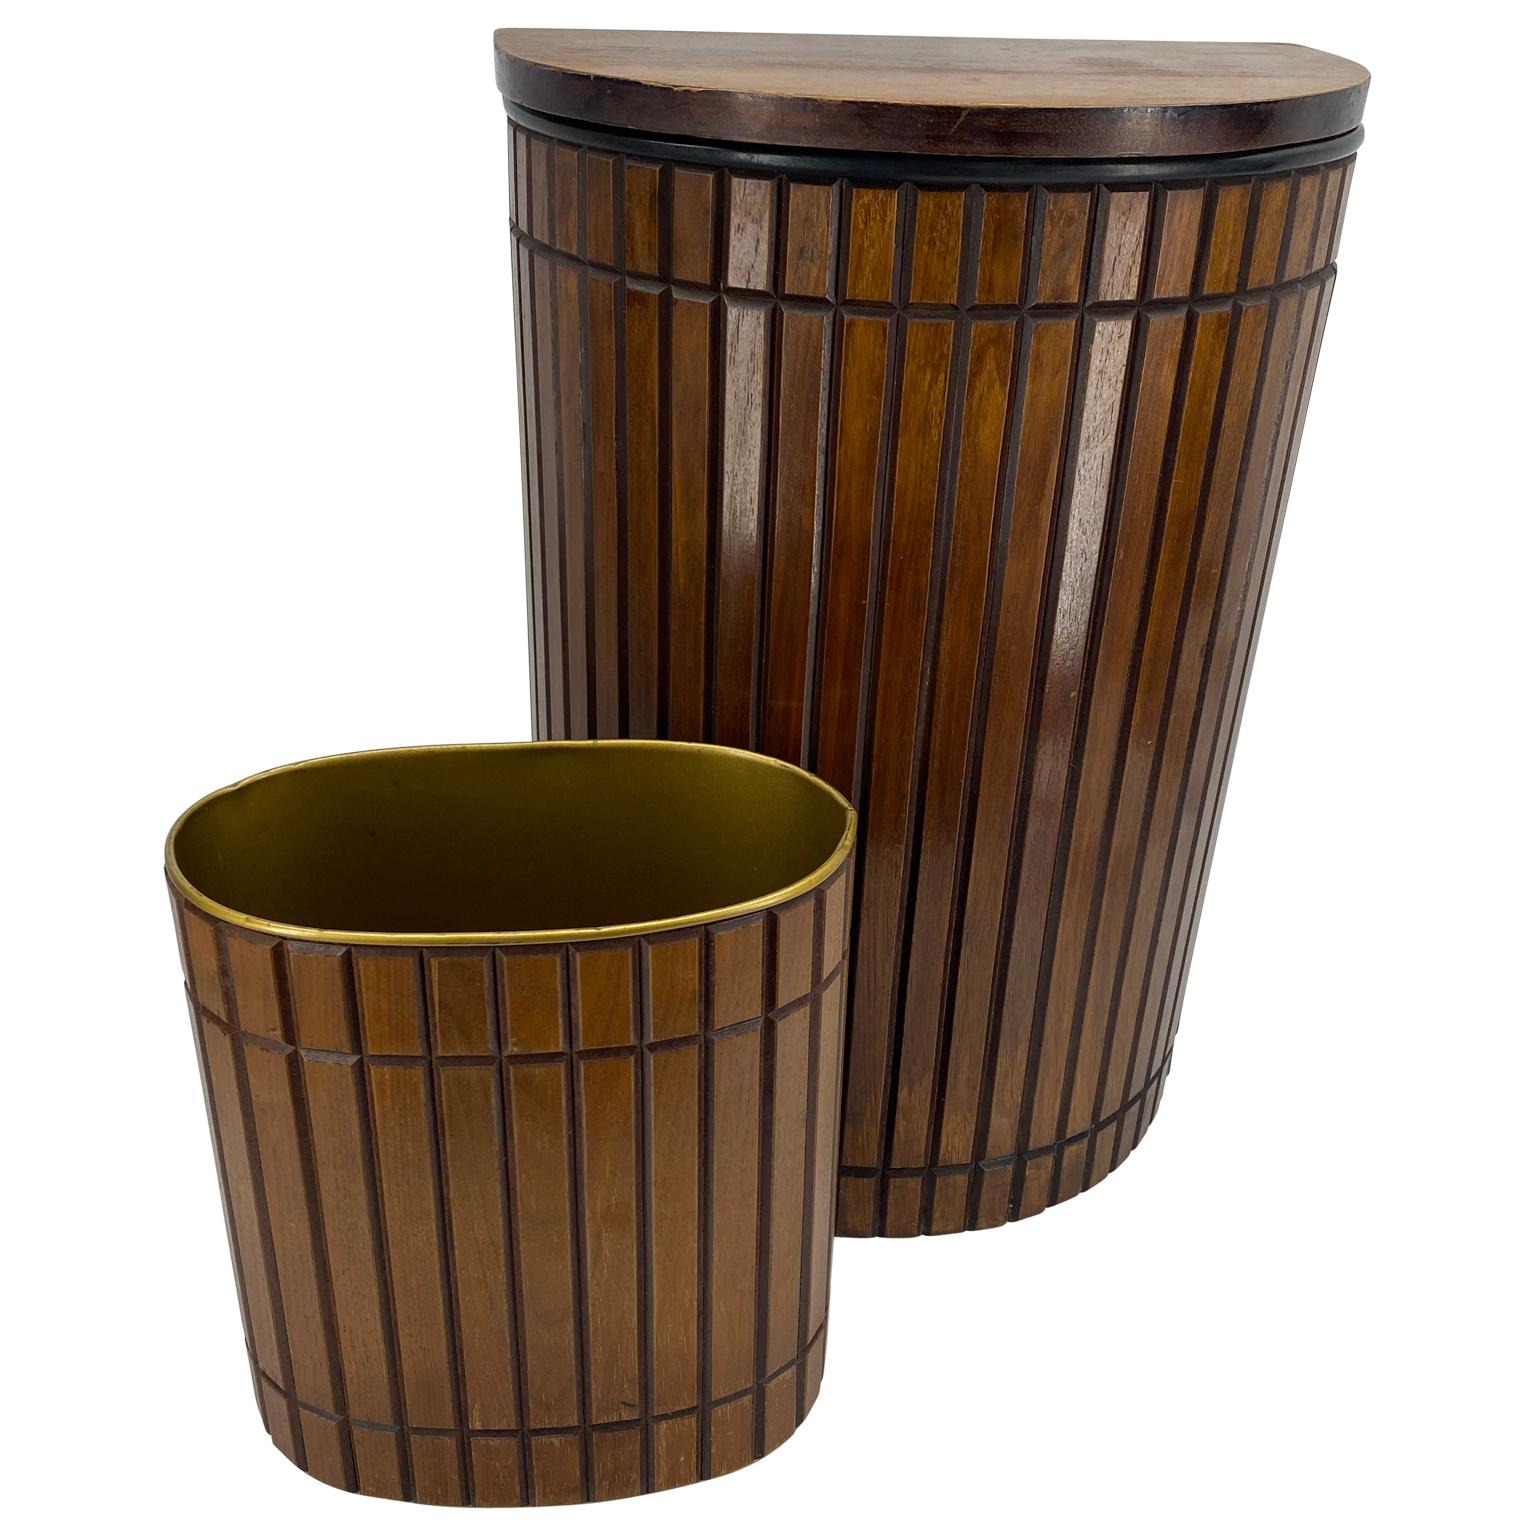 Mid-Century Modern wood hamper and trashcan set. This classic Mid-Century Modern bathroom accessory pair is walnut with black metal accents. The hamper has a lid and is lined in white metal. All original, the stylish set is as functional as it is